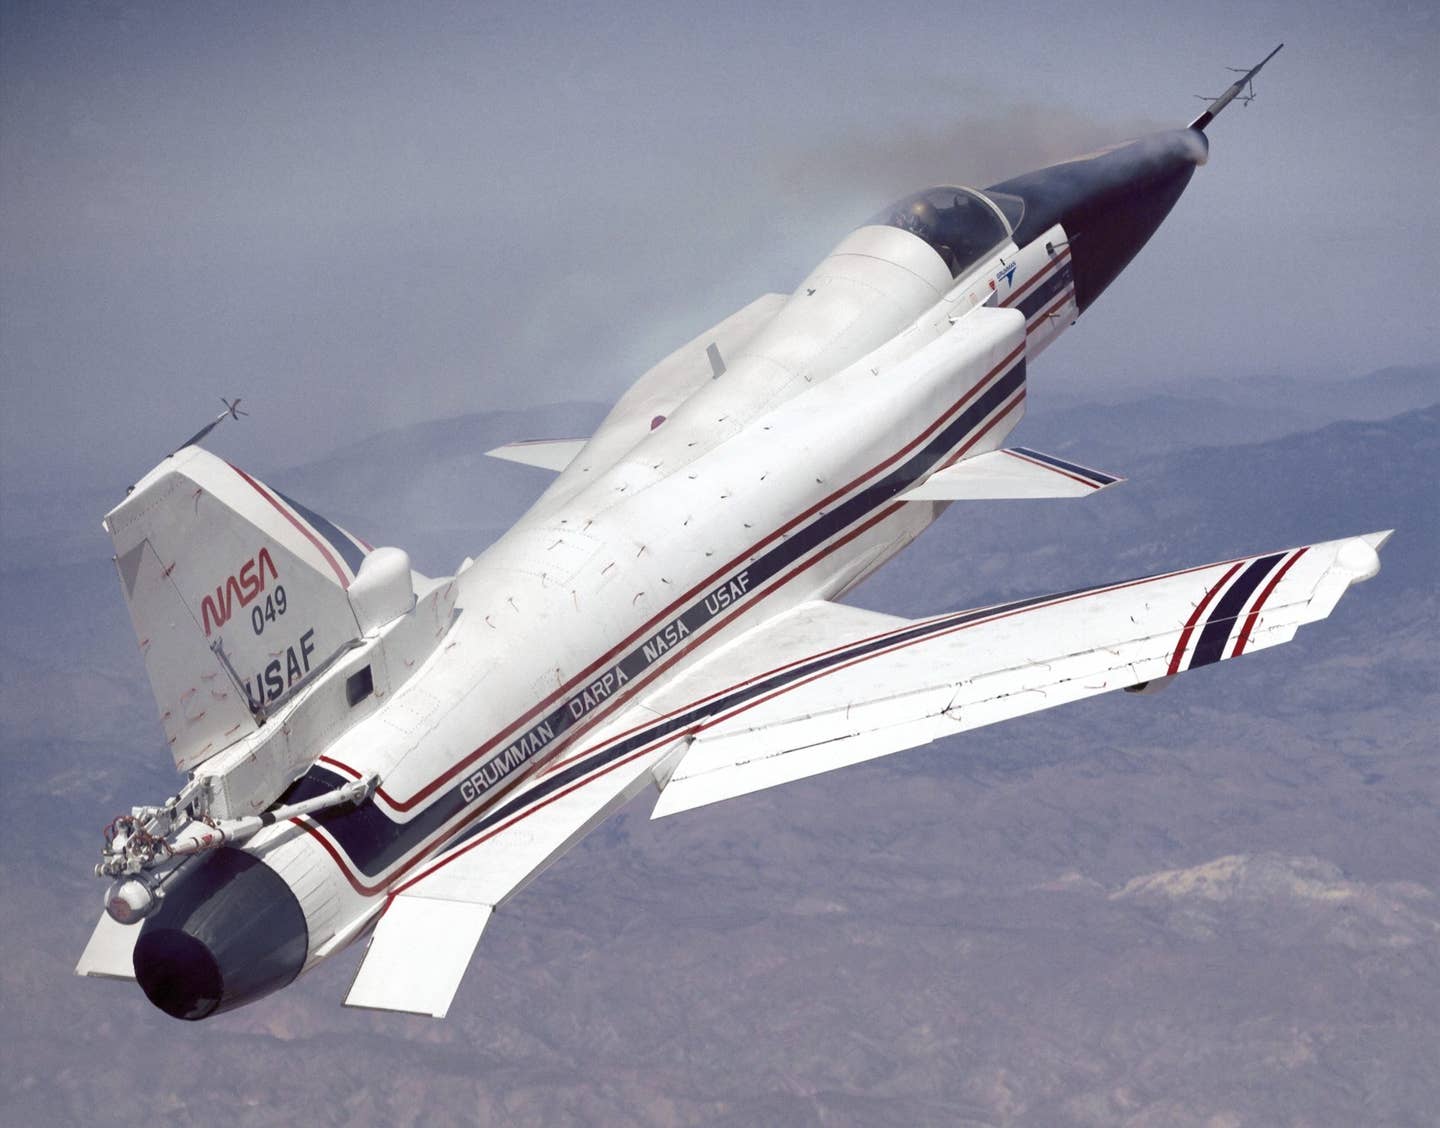 The X-29 shows moves that could make it a good dogfighter. (NASA photo)